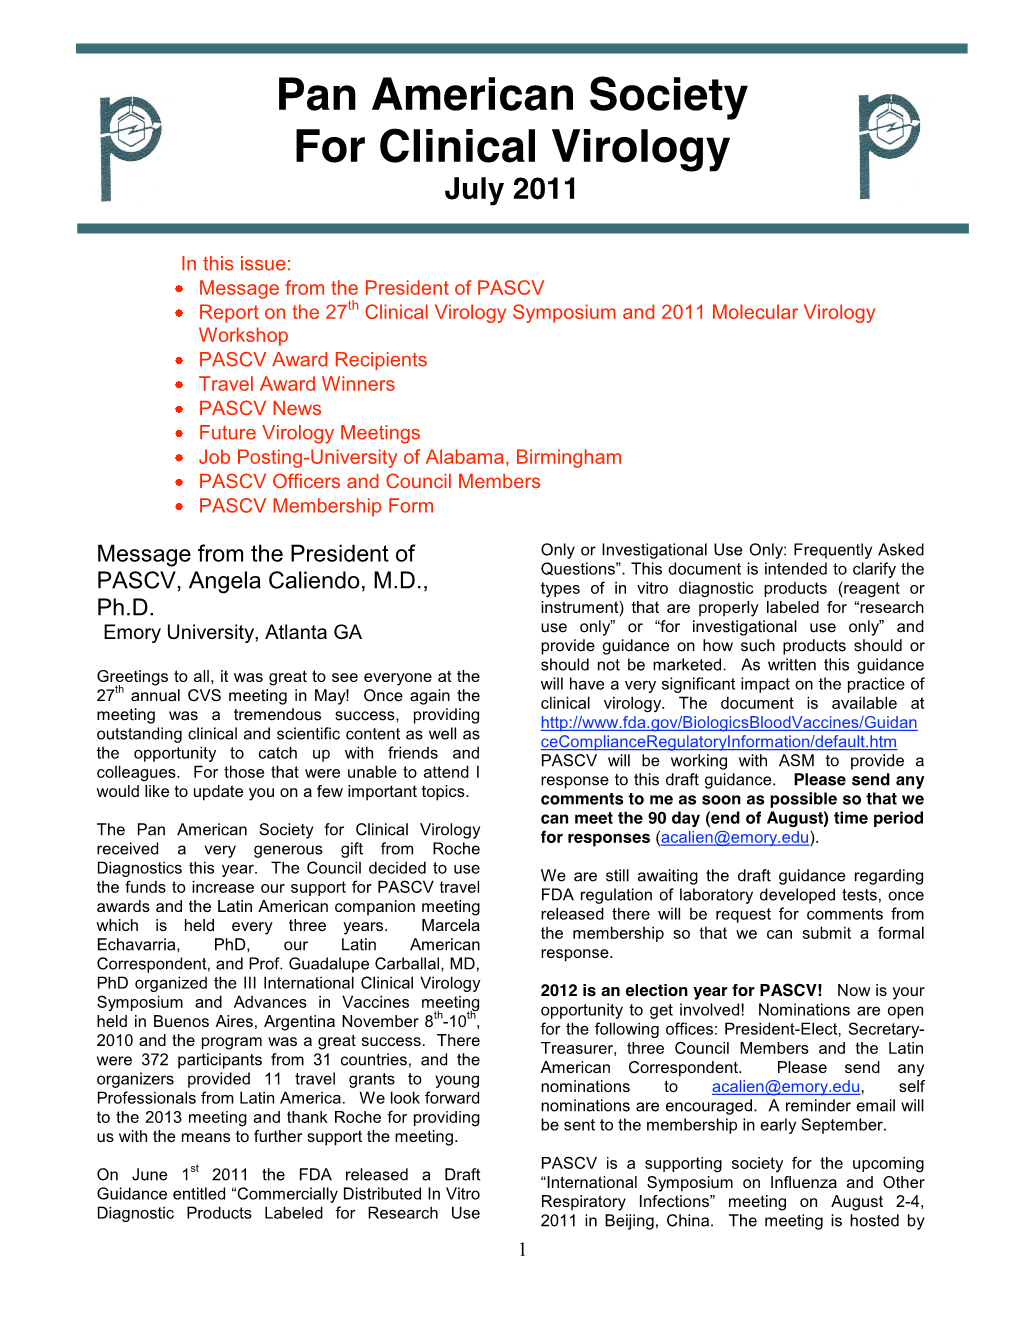 Pan American Society for Clinical Virology July 2011